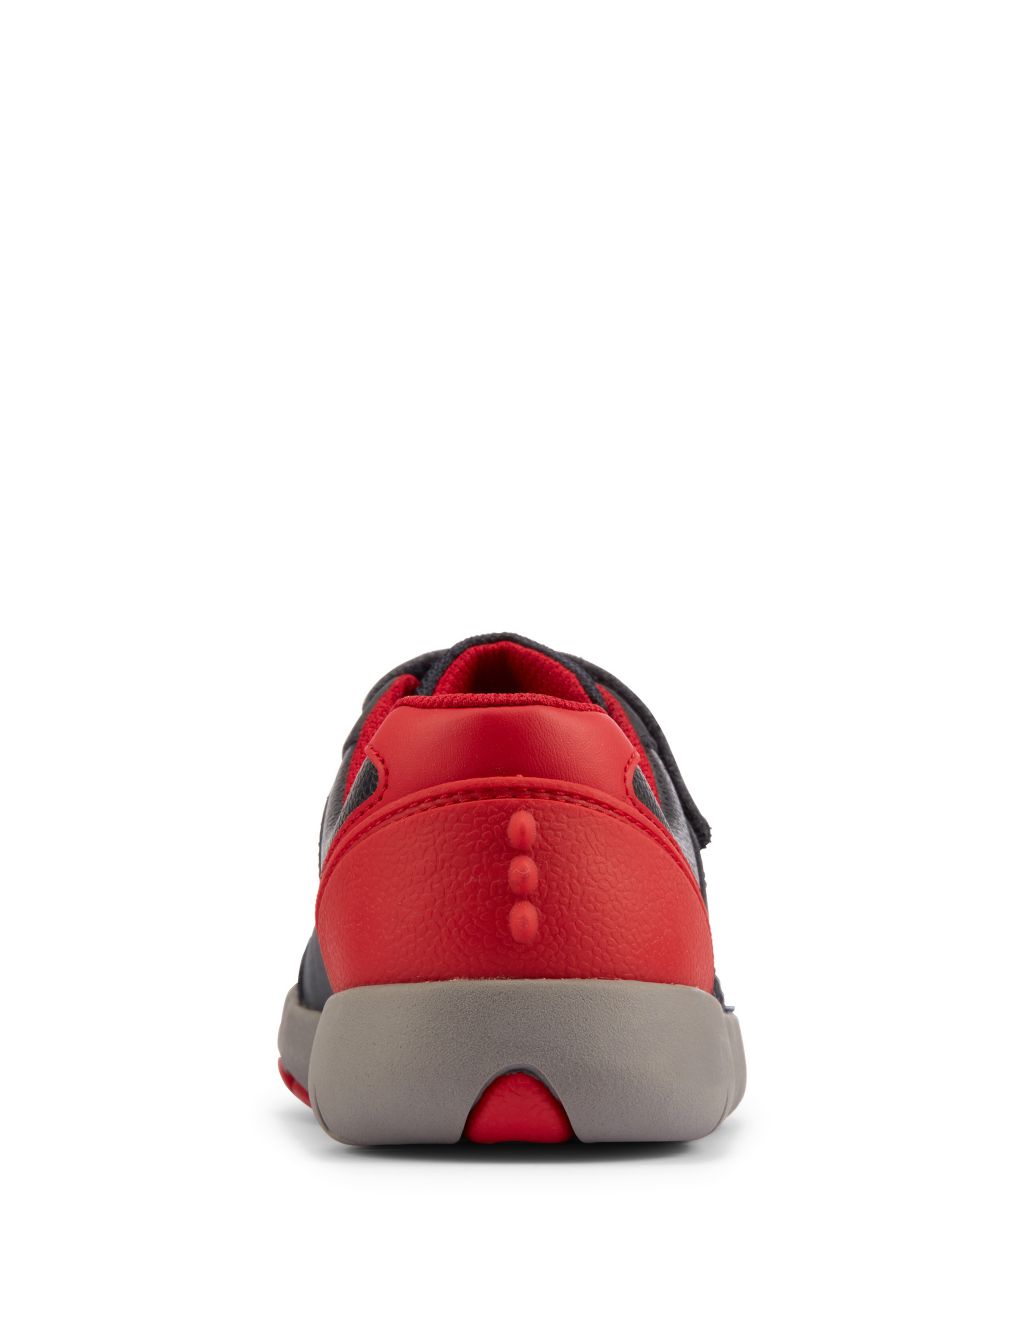 Kids' Riptape Trainers (10 Small-2.5 Large) image 3